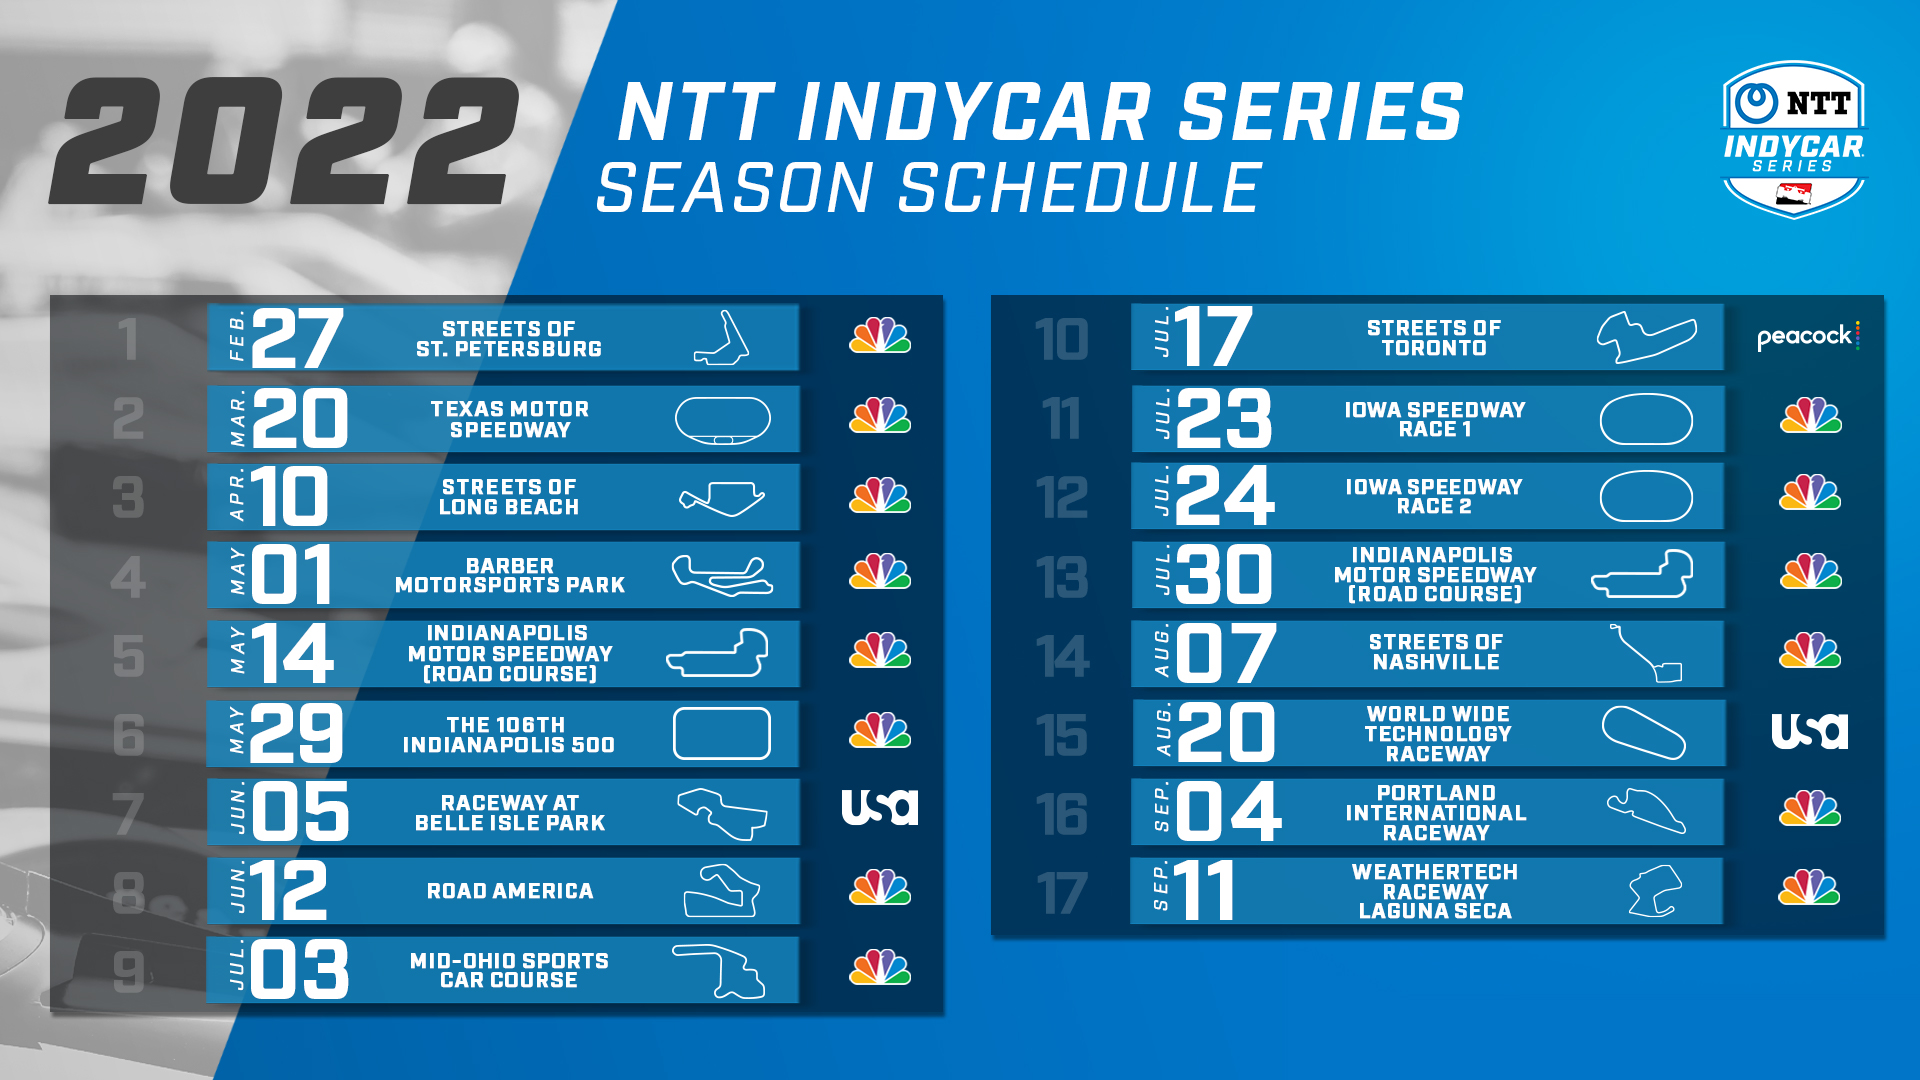 Indy Car 2022 Schedule Indycar On Nbc On Twitter: "The 2022 @Indycar Series Schedule Is Here! From  The @Gpstpete To The Finale At @Weathertechrcwy, A Whopping 14 Races Will  Be Broadcast Live On @Nbc. All Races